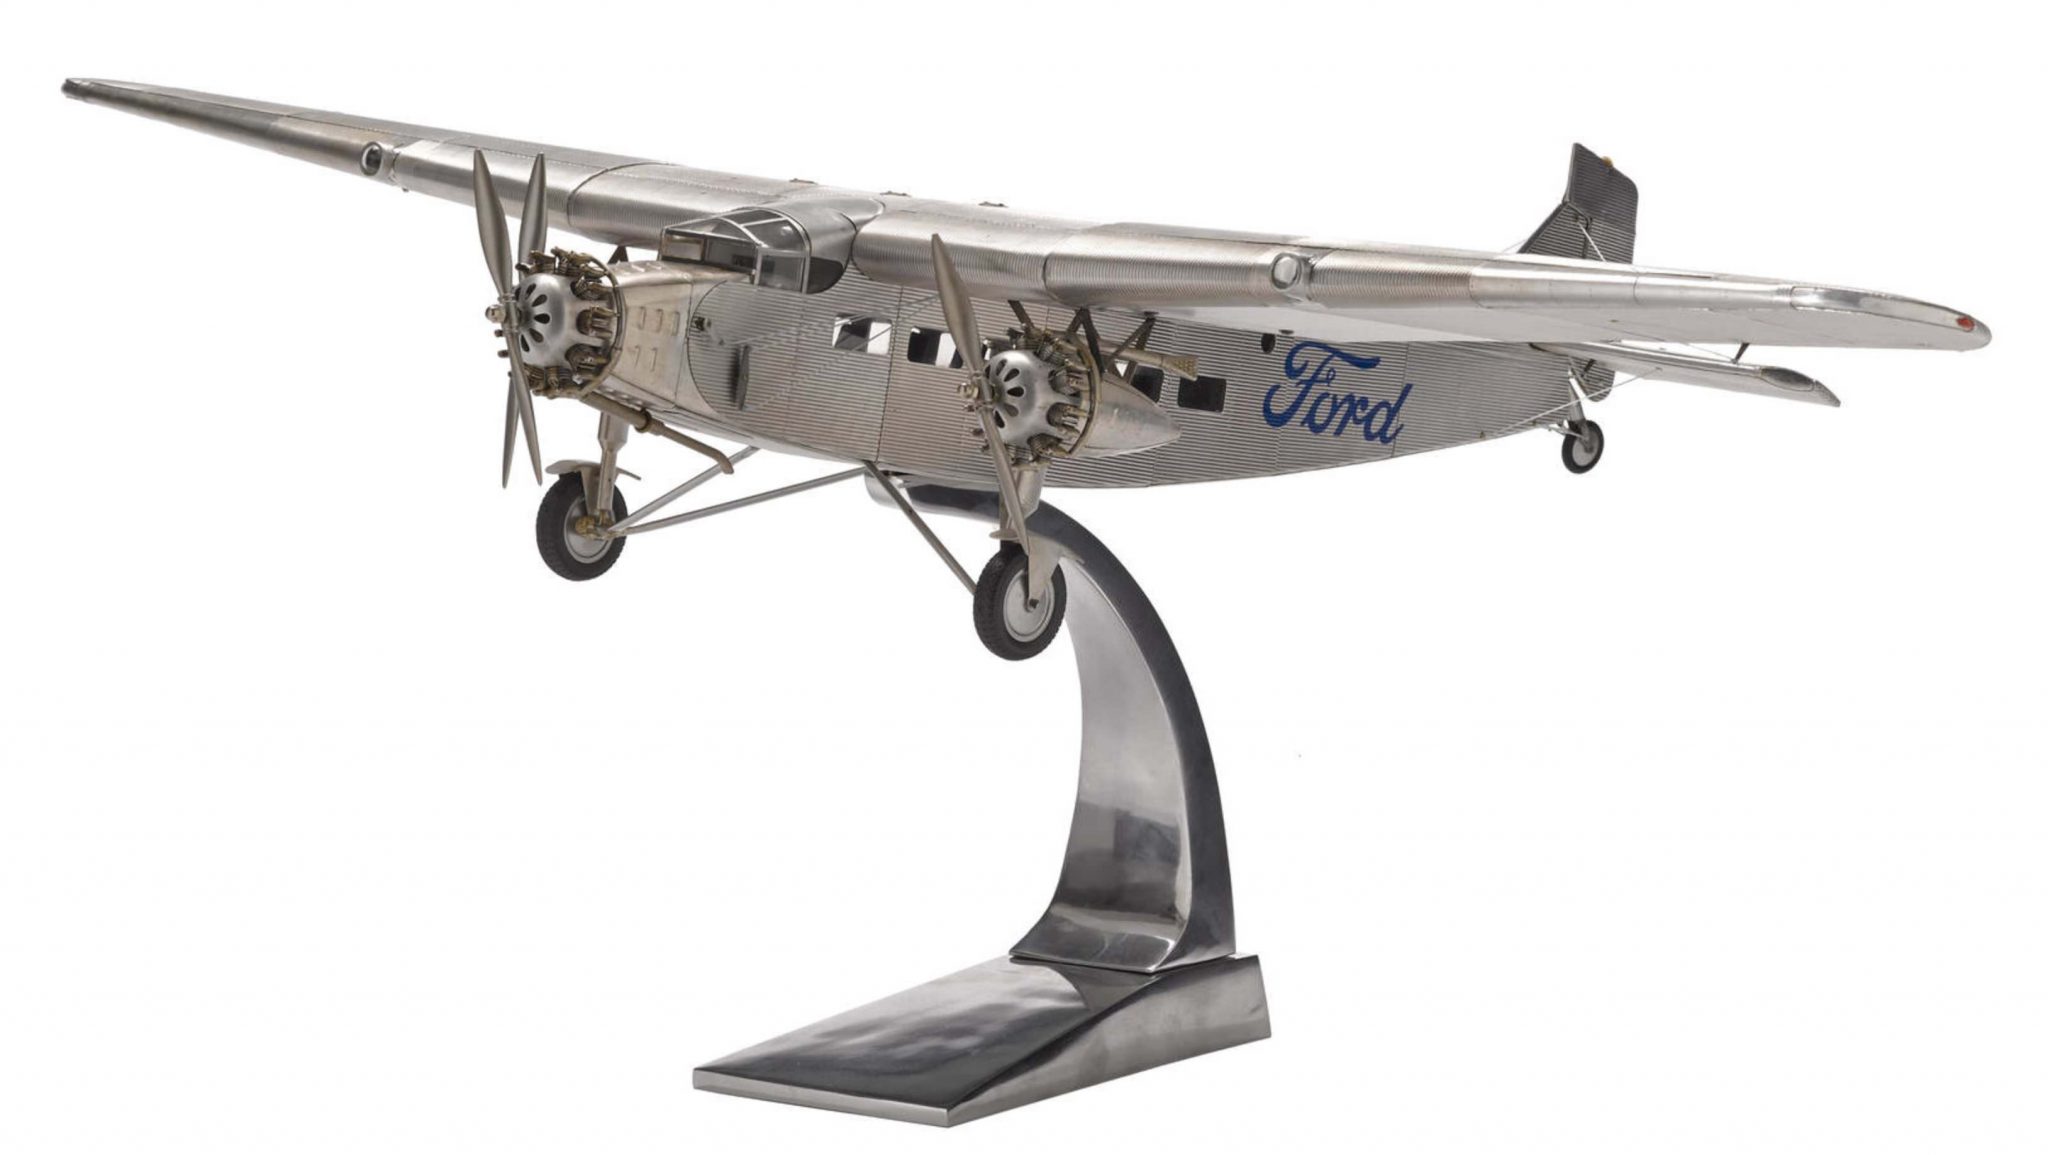 Ford trimotor model airplane #9